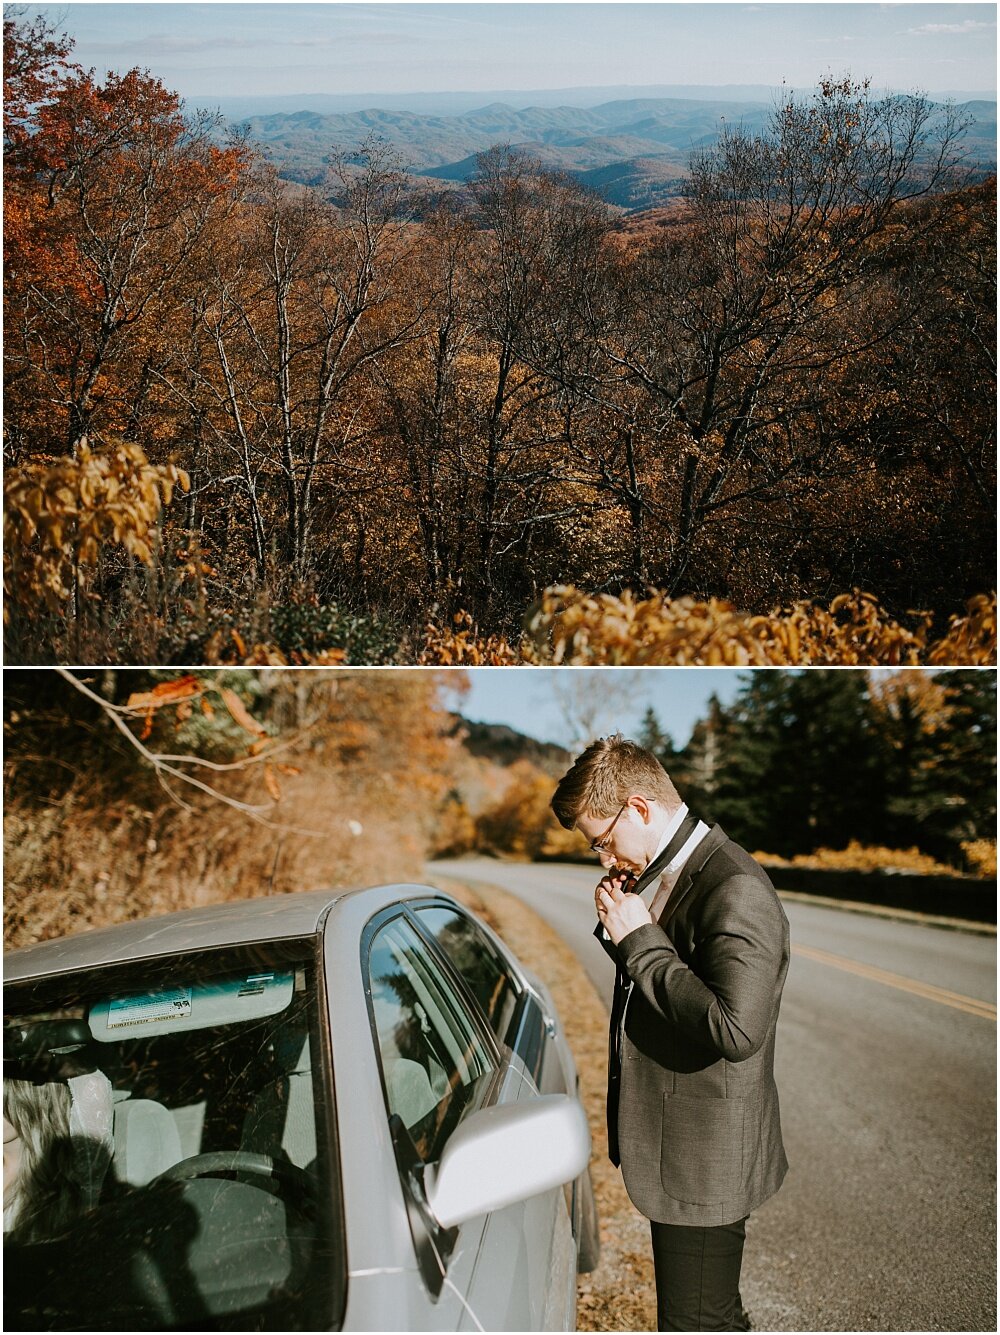 Groom puts tie on in the reflection of the car window.